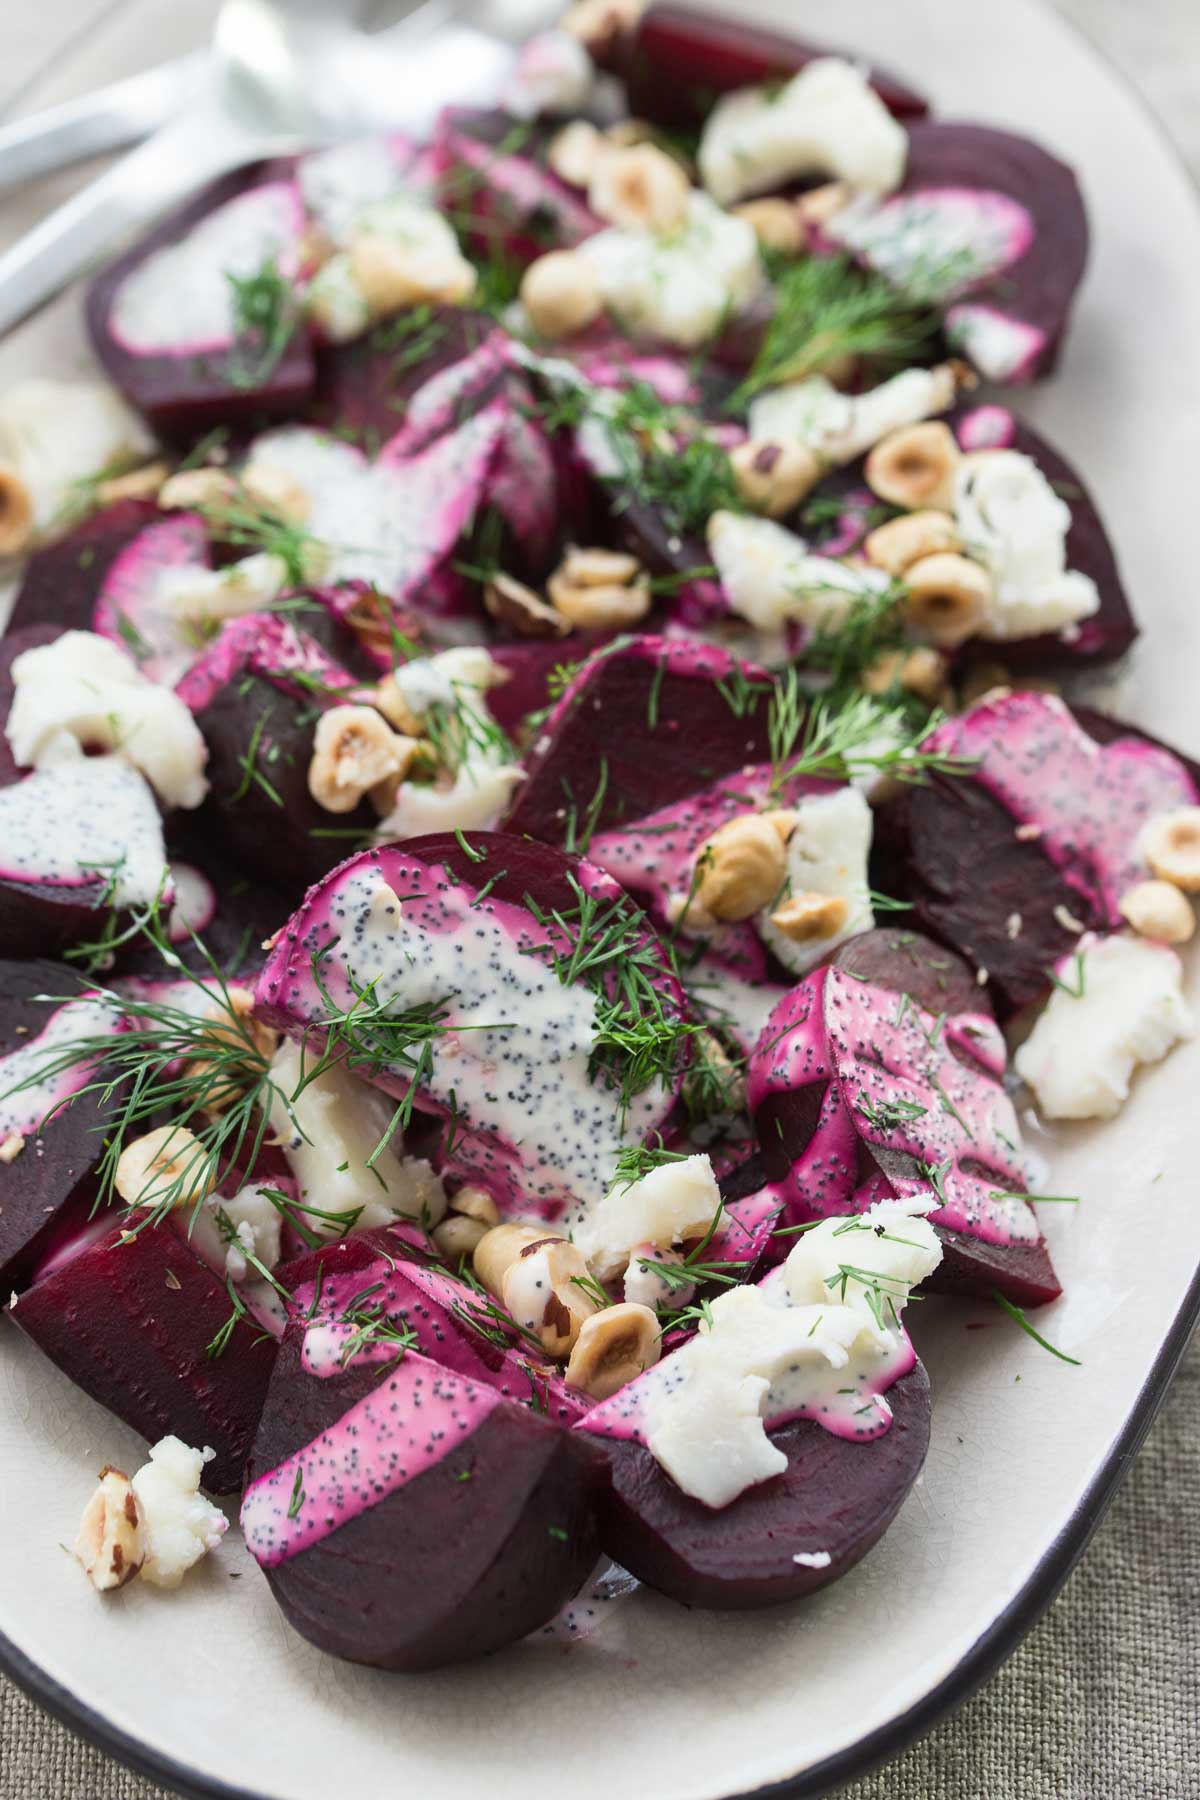 Beet Salad with Goat Cheese, Hazelnuts and Poppy Seed Dressing